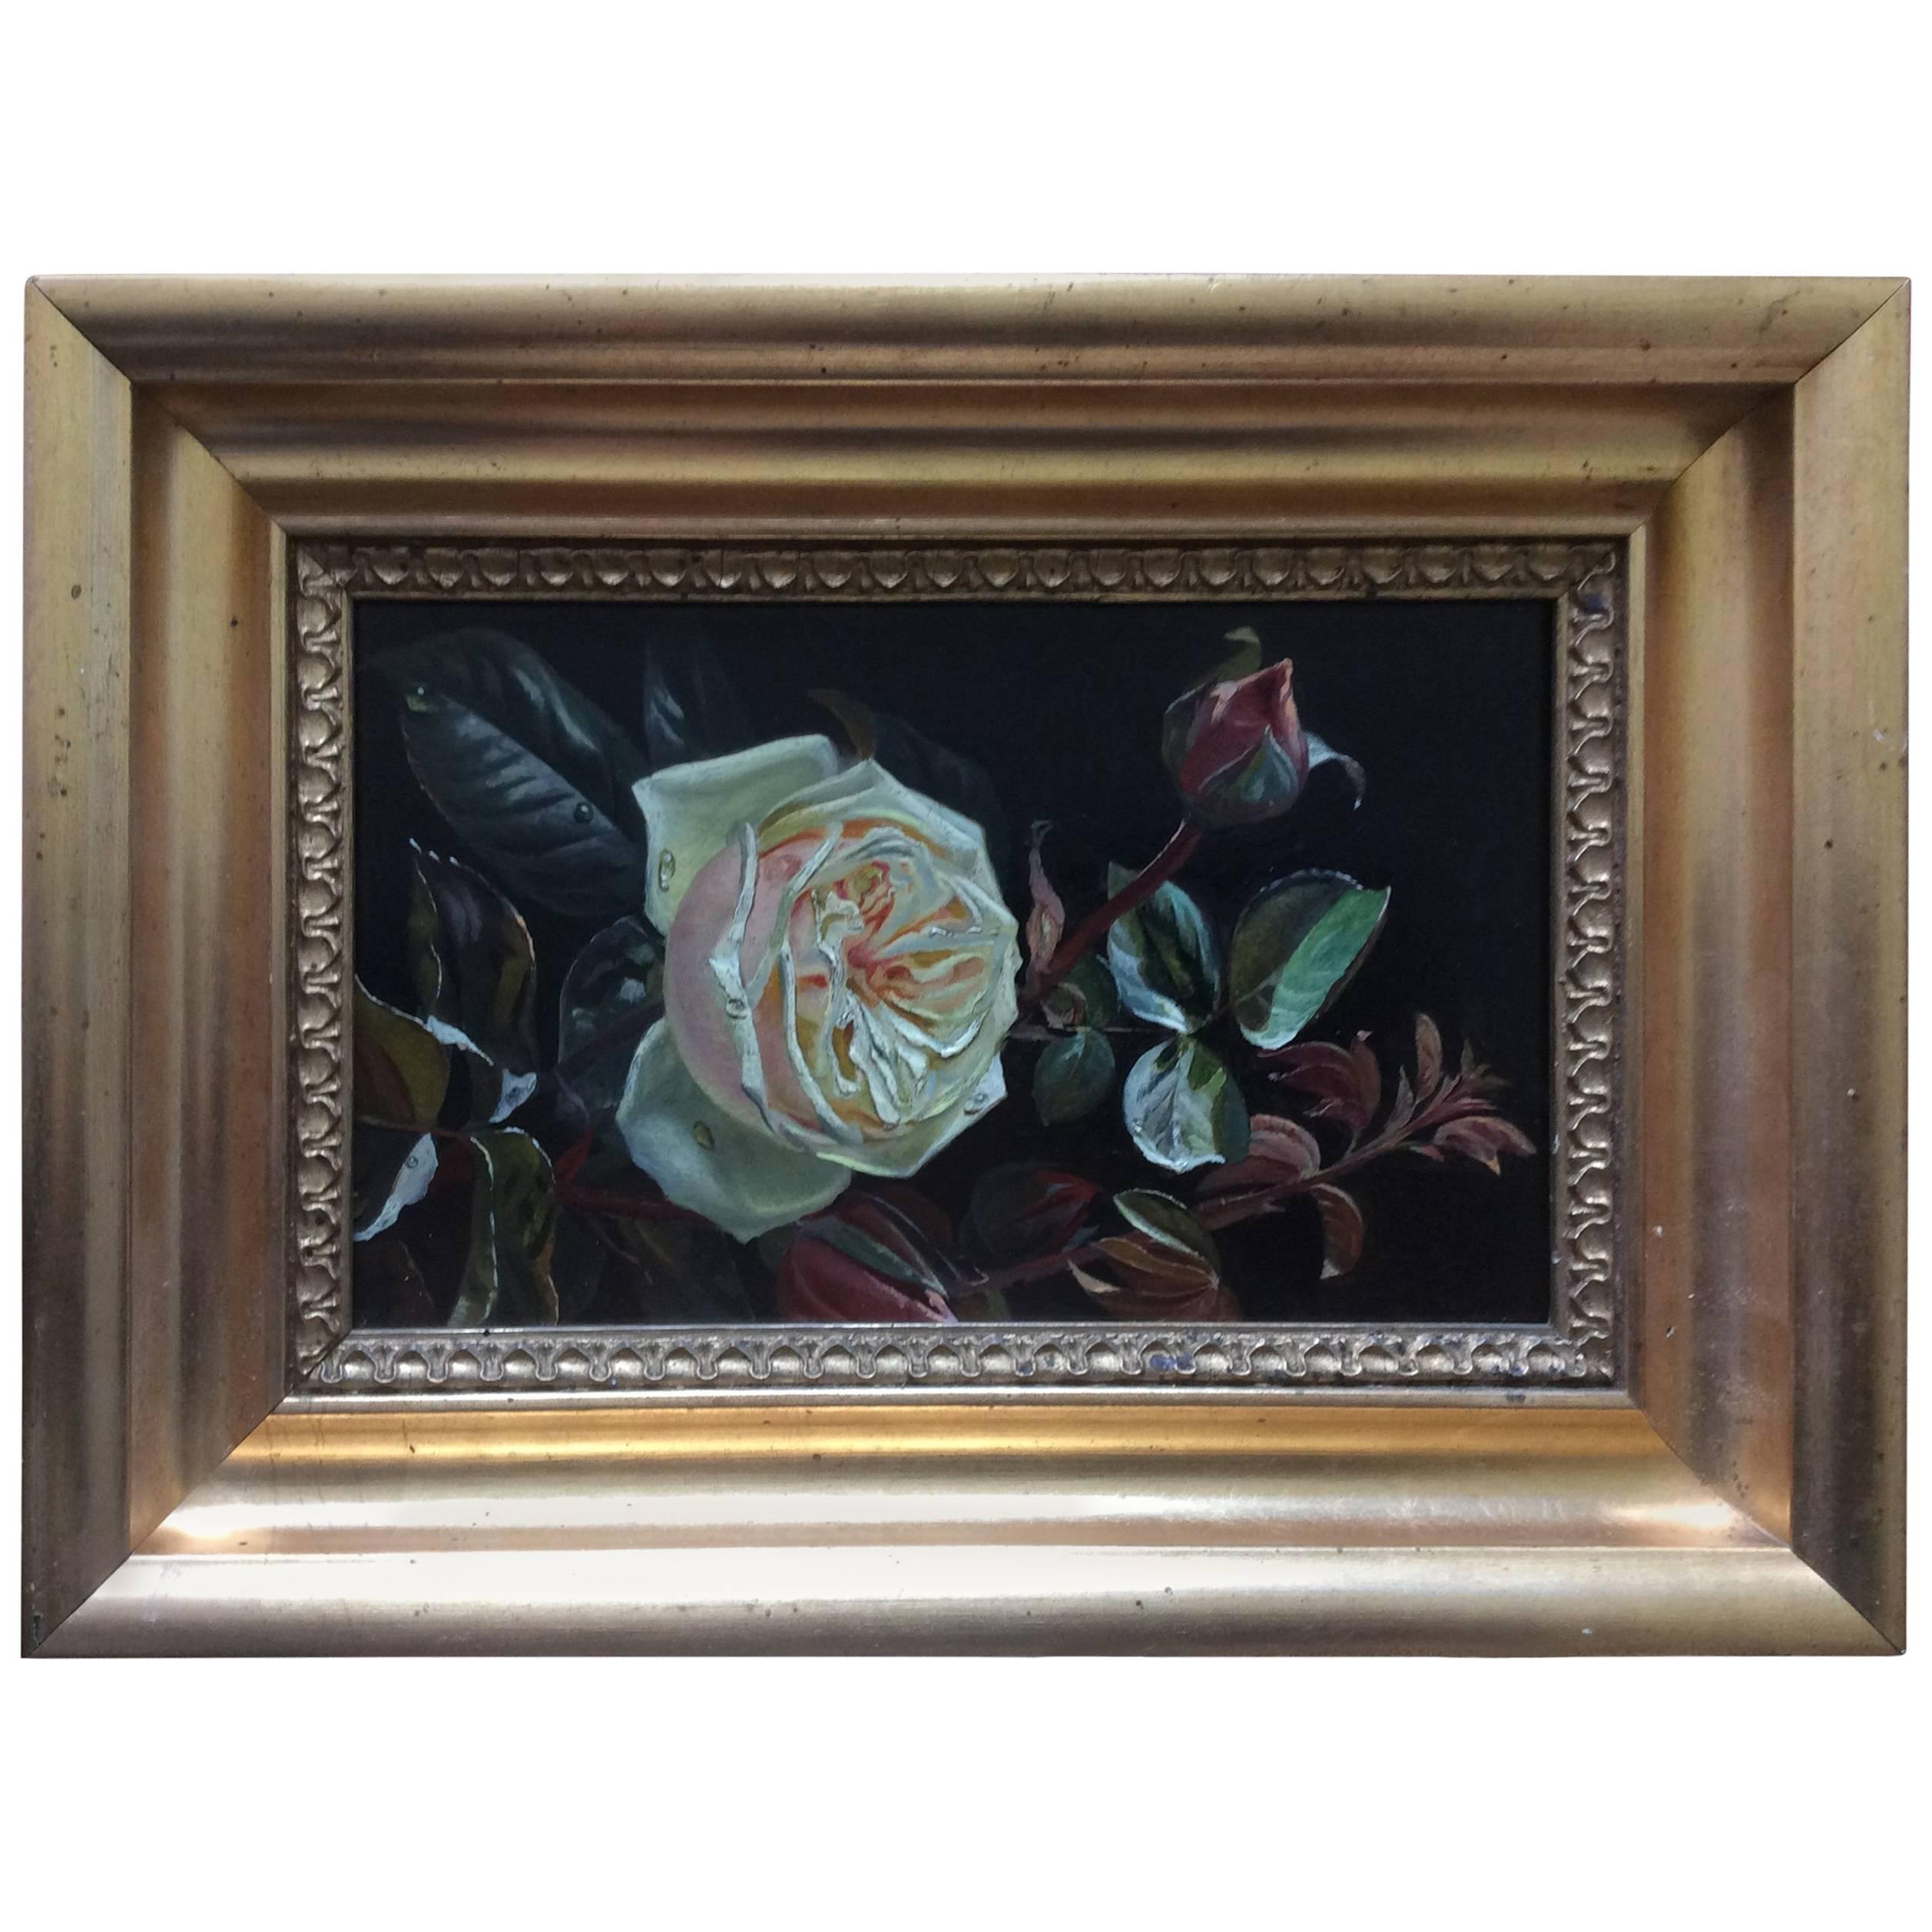 "Flowers a Pink and Cream Rose with Raindrops" Painting by Sophus Petersen For Sale